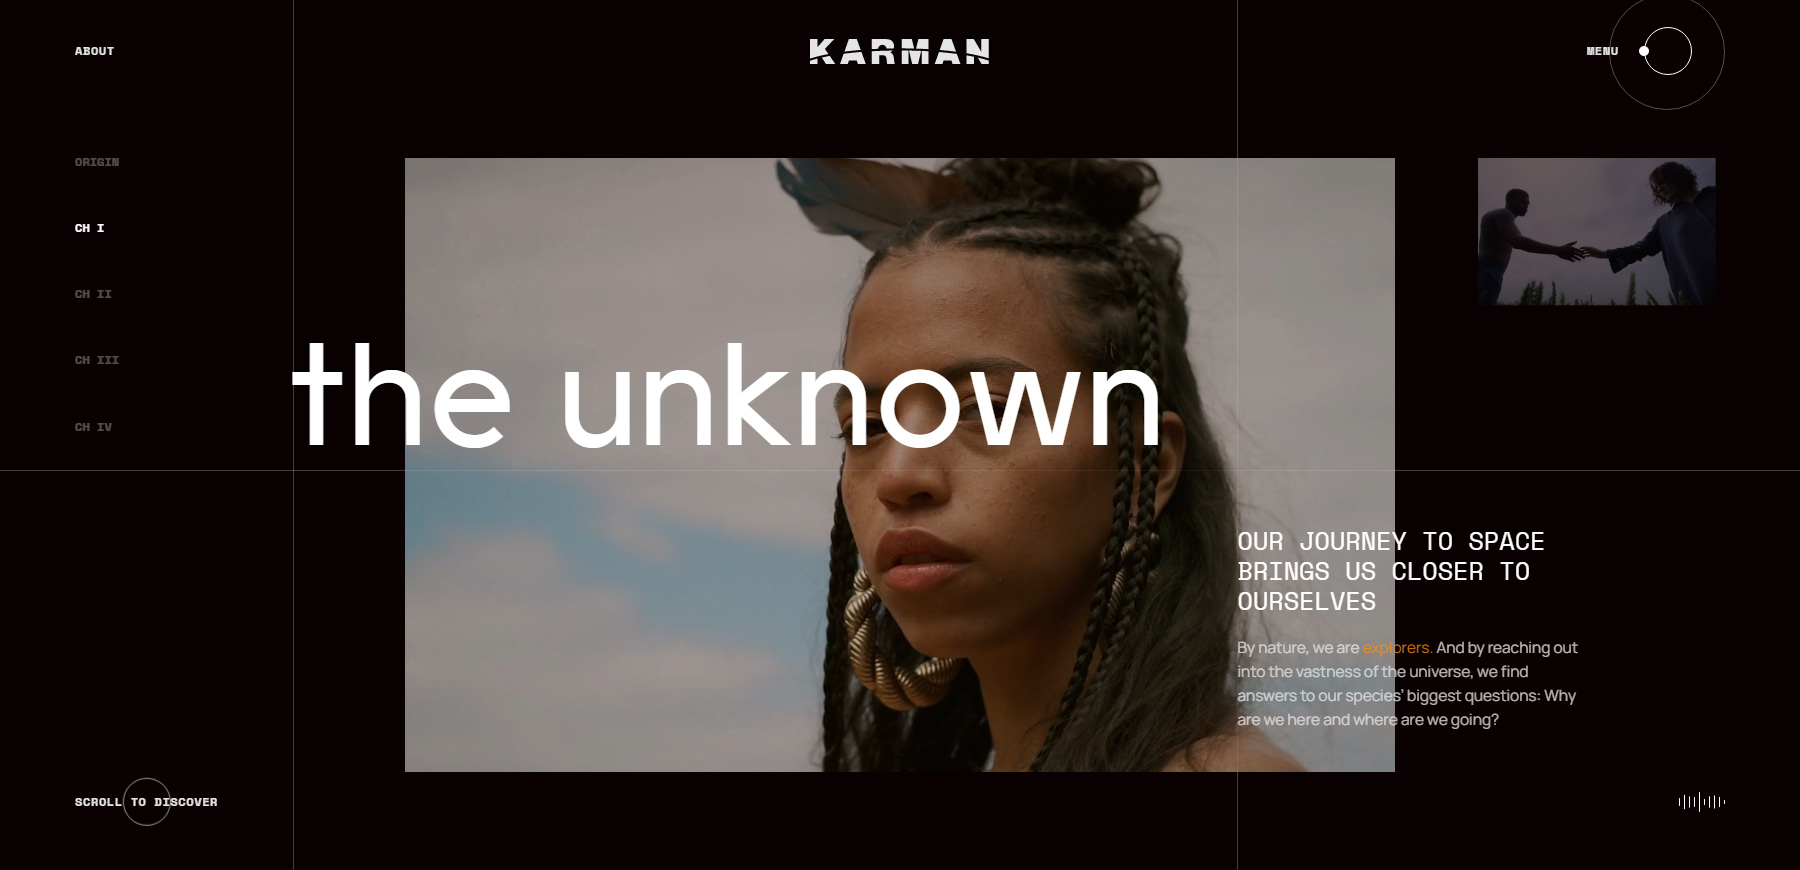 The Space that makes us Human - Website of the Day